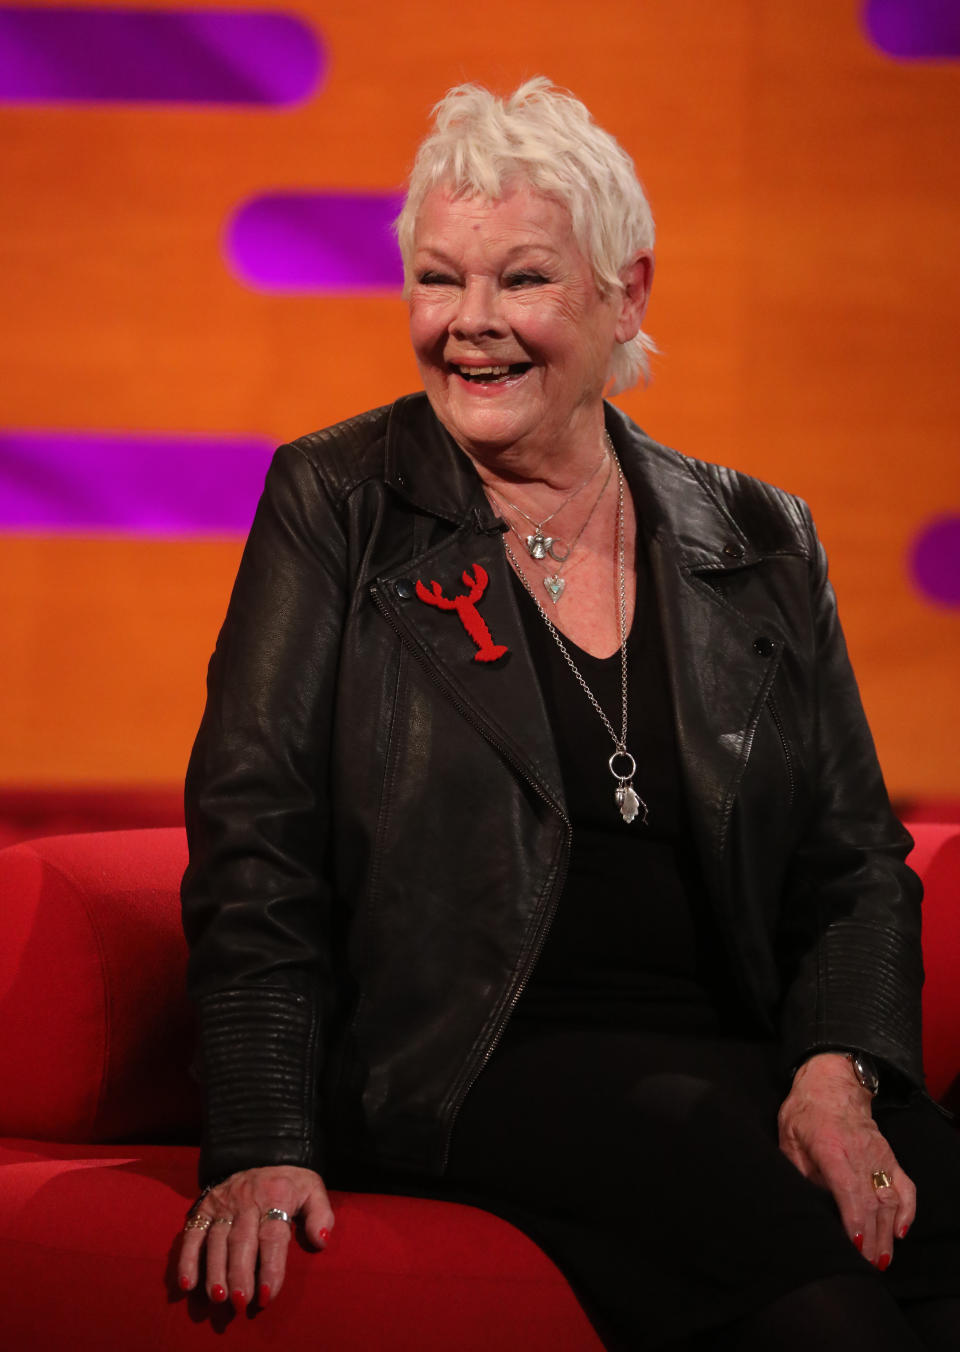 Judi Dench during the filming for the Graham Norton Show at BBC Studioworks 6 Television Centre, Wood Lane, London, to be aired on BBC One on Friday evening. (Photo by Isabel Infantes/PA Images via Getty Images)